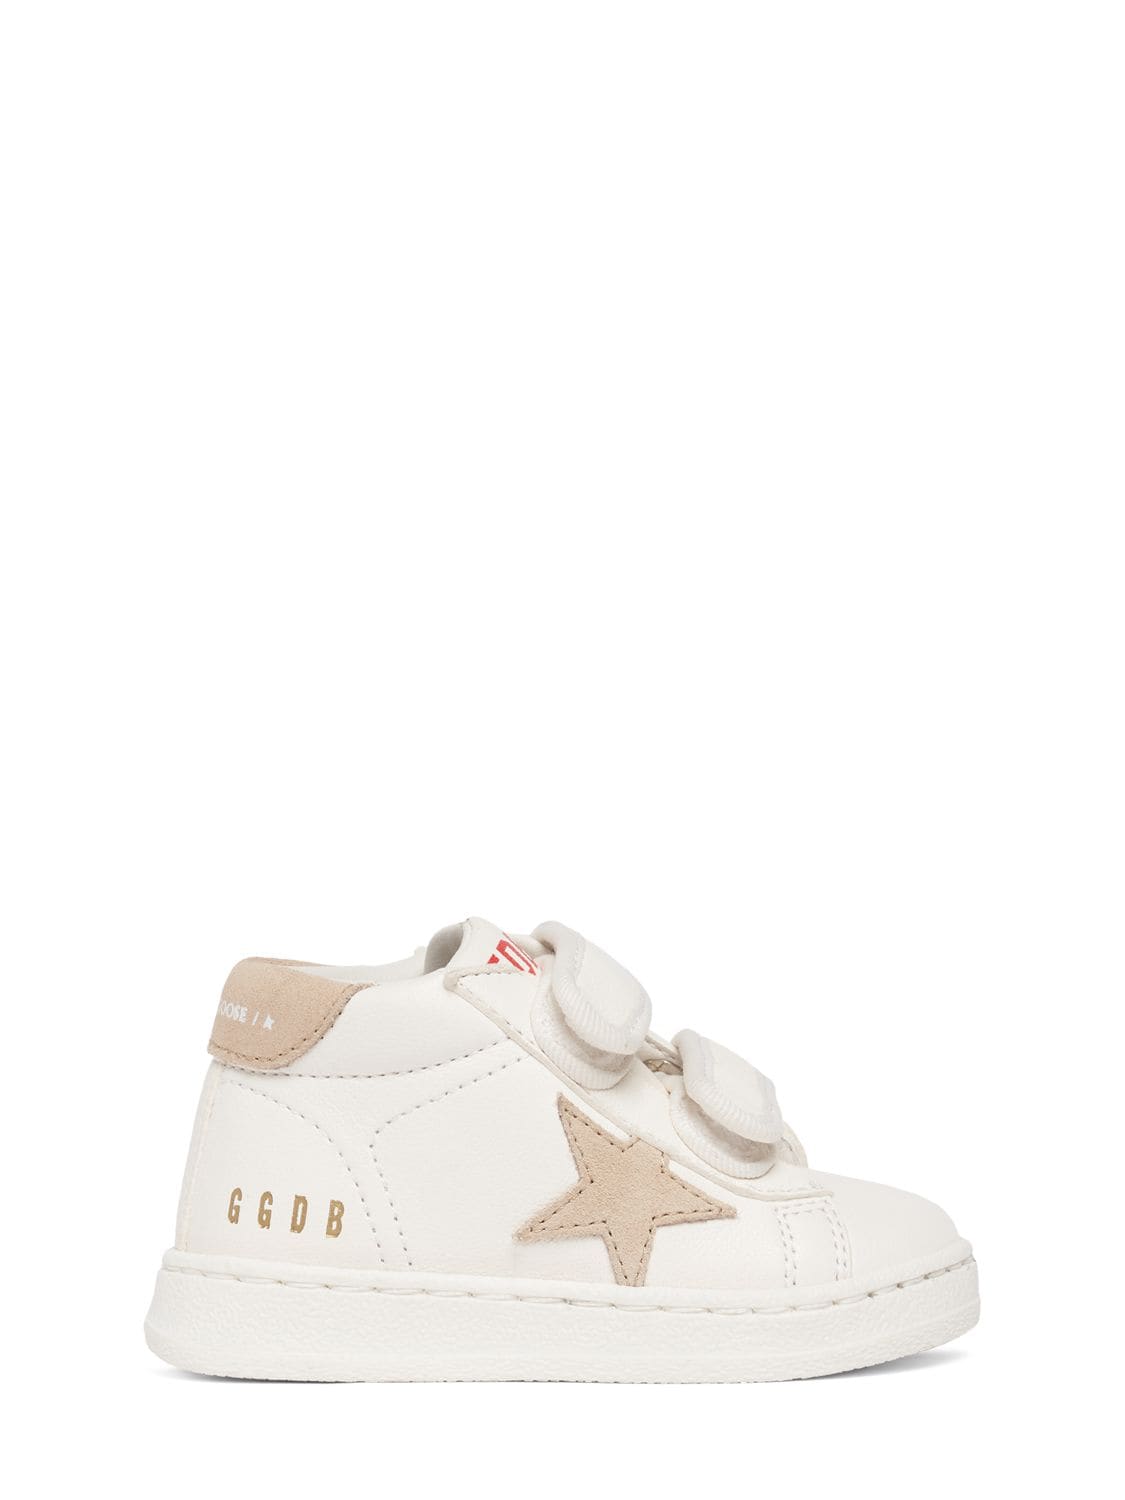 June Leather Strap Sneakers